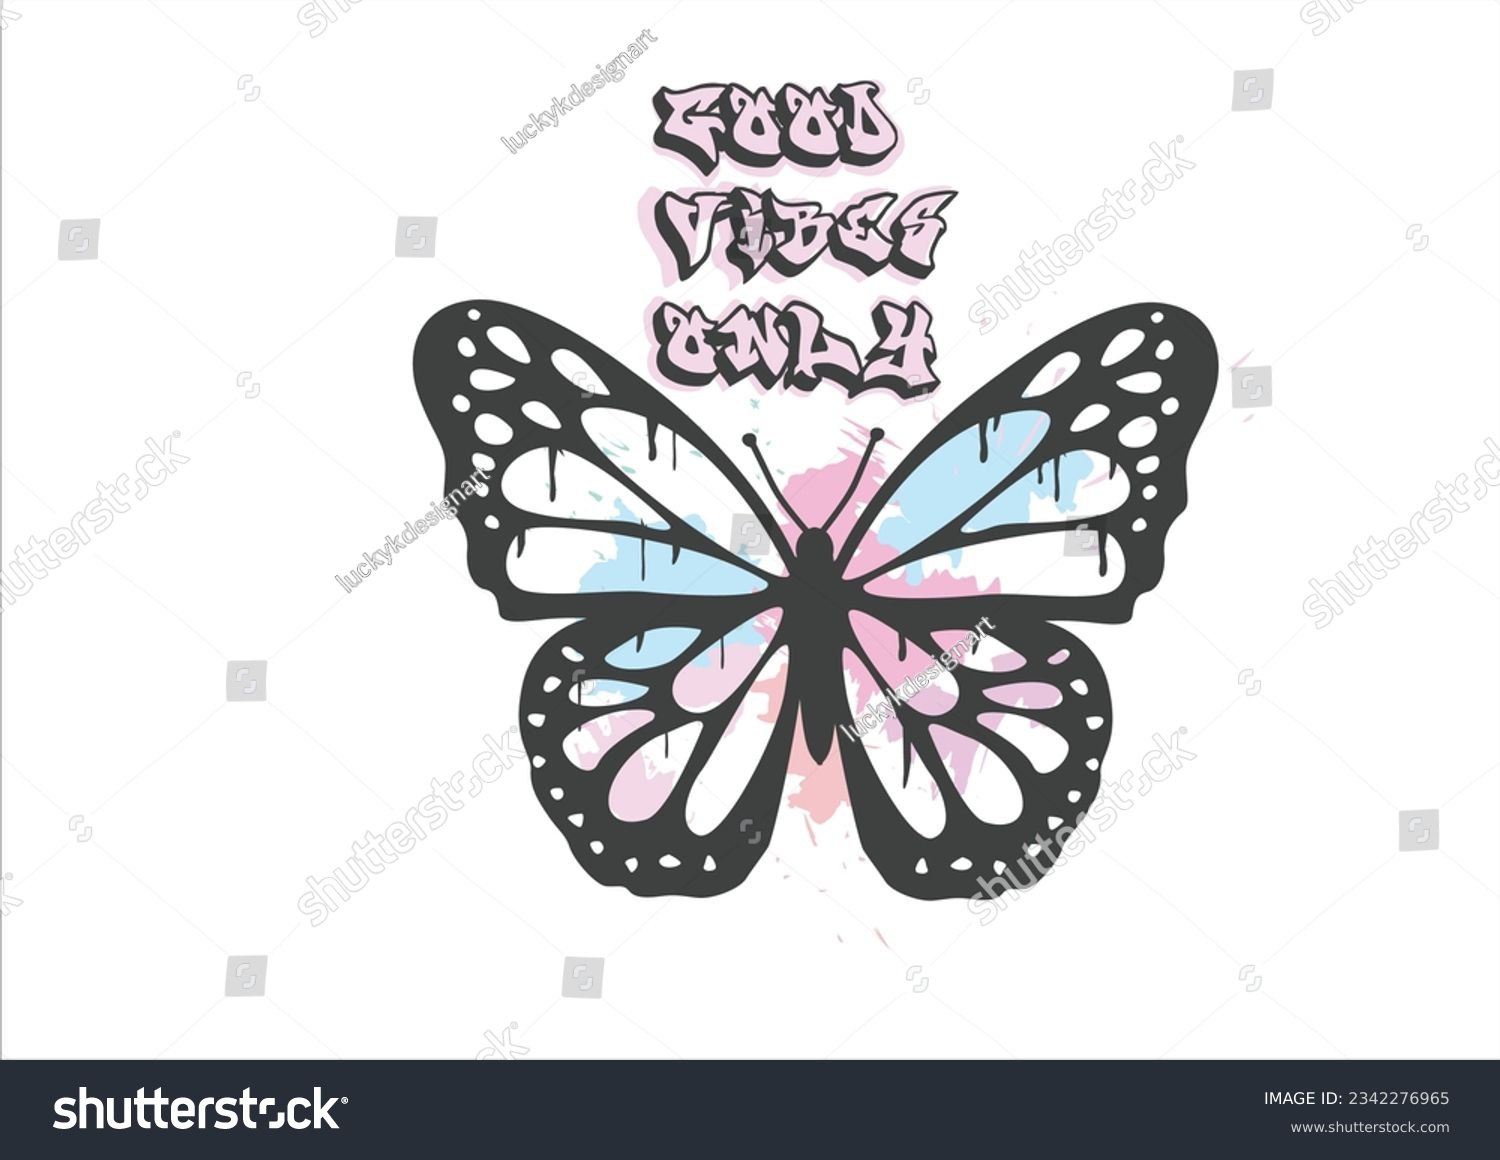 SVG of positive vibes vector hand drawn design svg